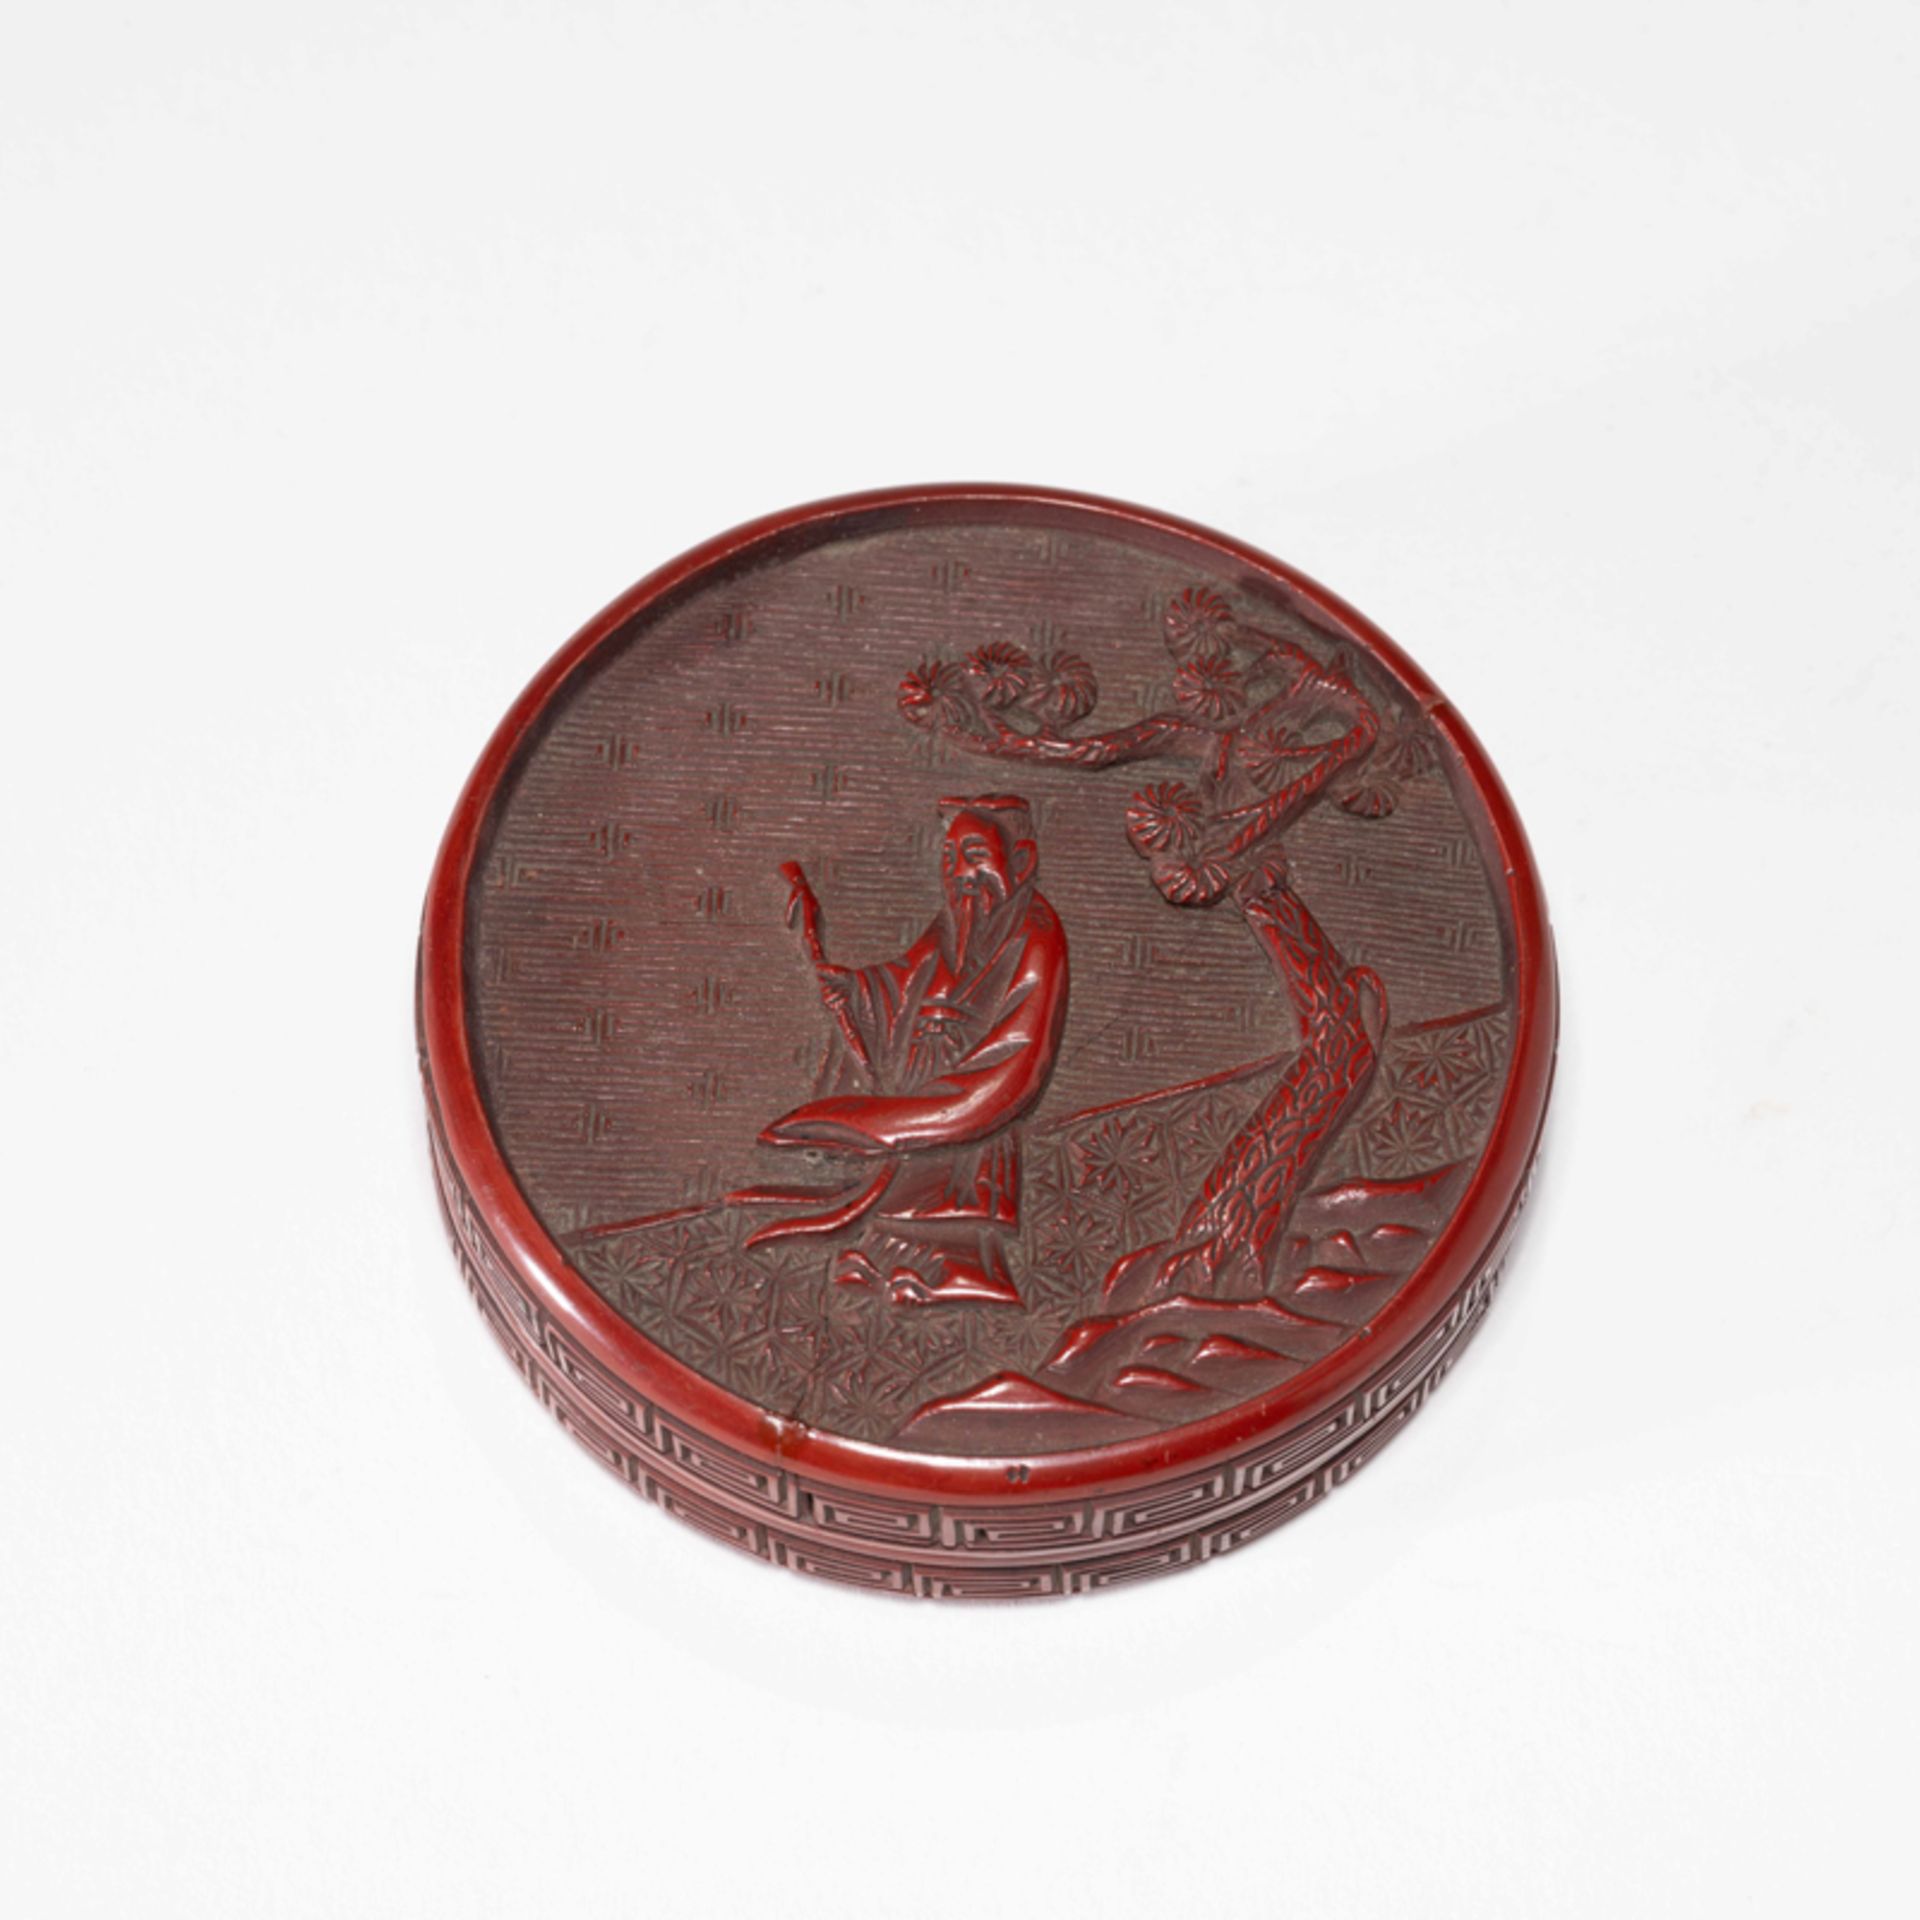 A CHINESE LACQUER 'FIGURE' INCENSE BOX, MING DYNASTY - Image 2 of 7